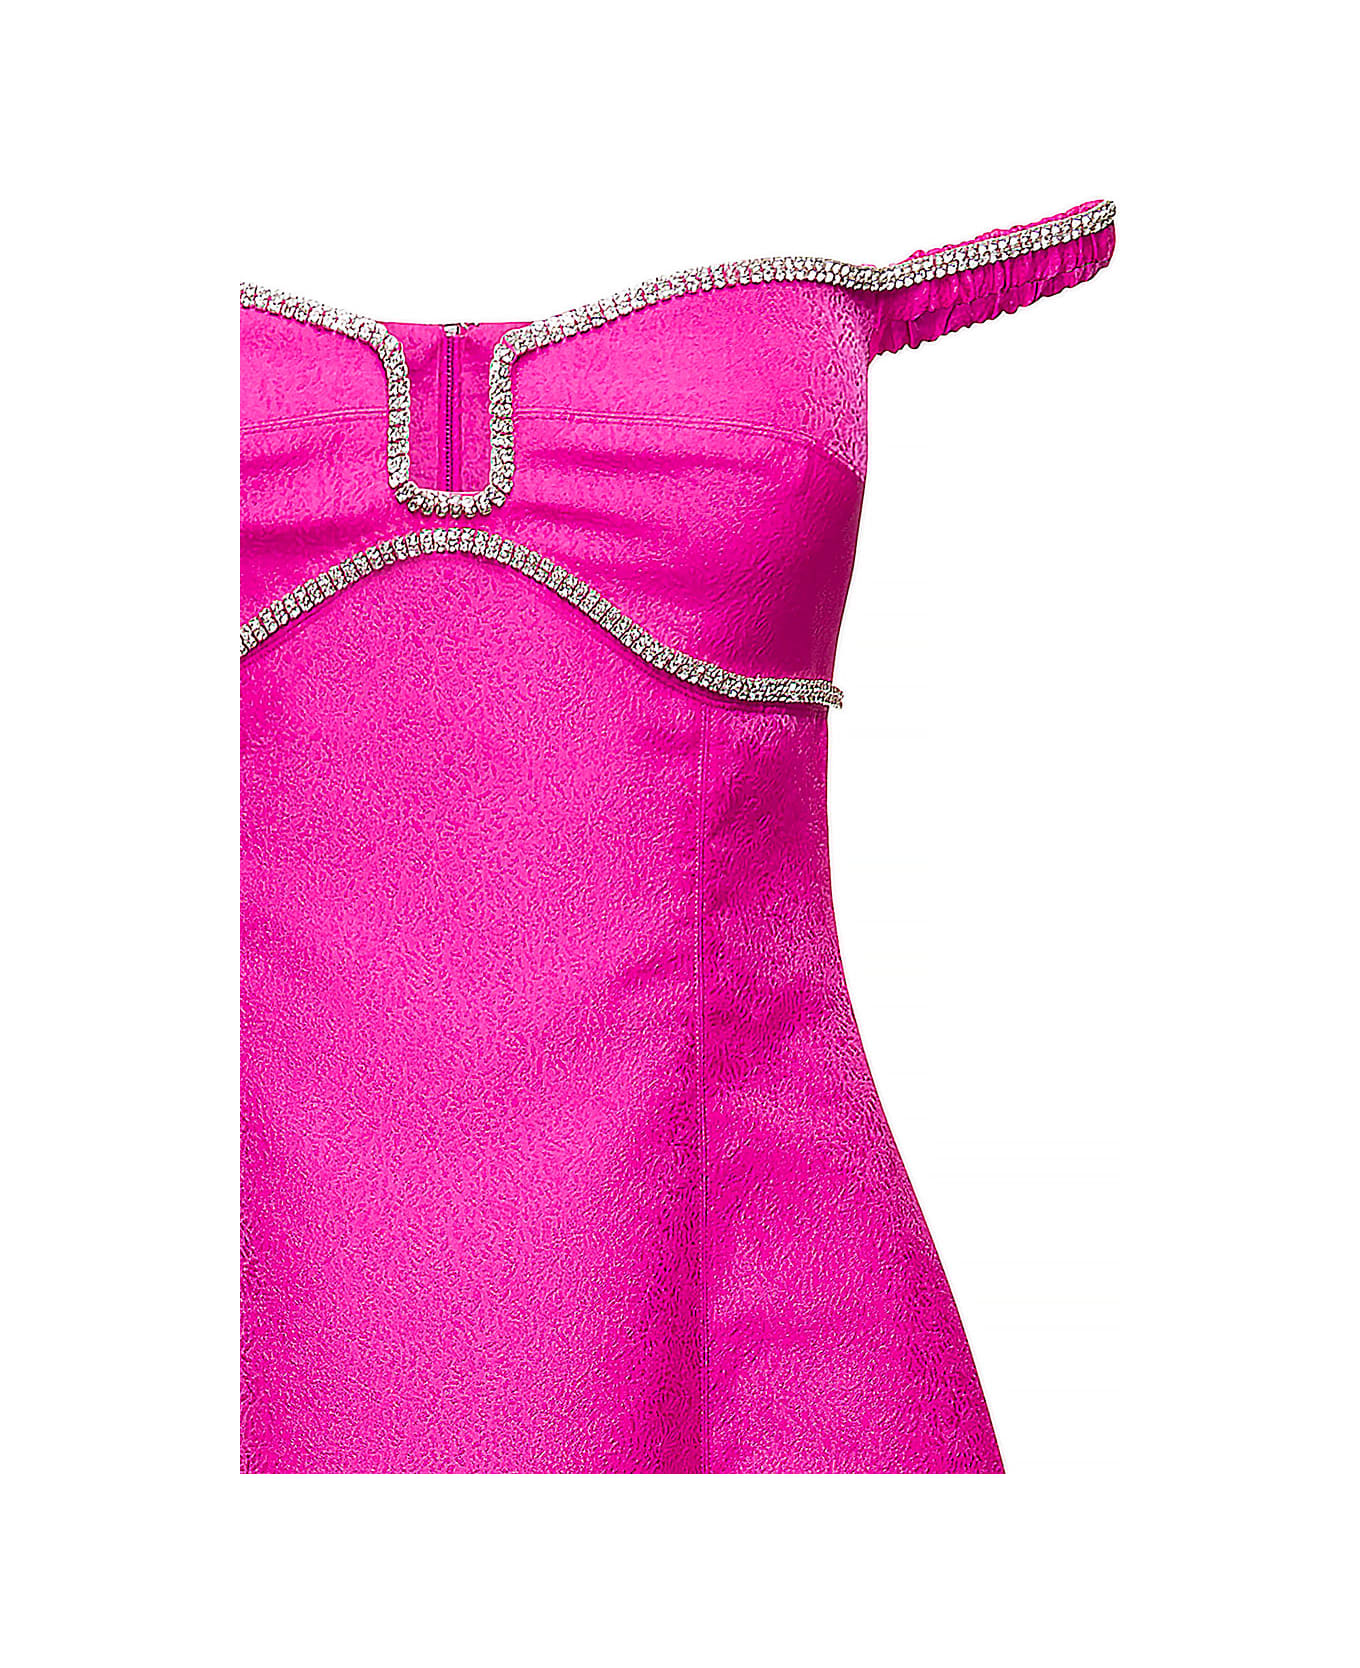 self-portrait Off-shoulder Flared Midi Dress With Crystal Embellished Detailing In Pink Satin Woman - Fuxia